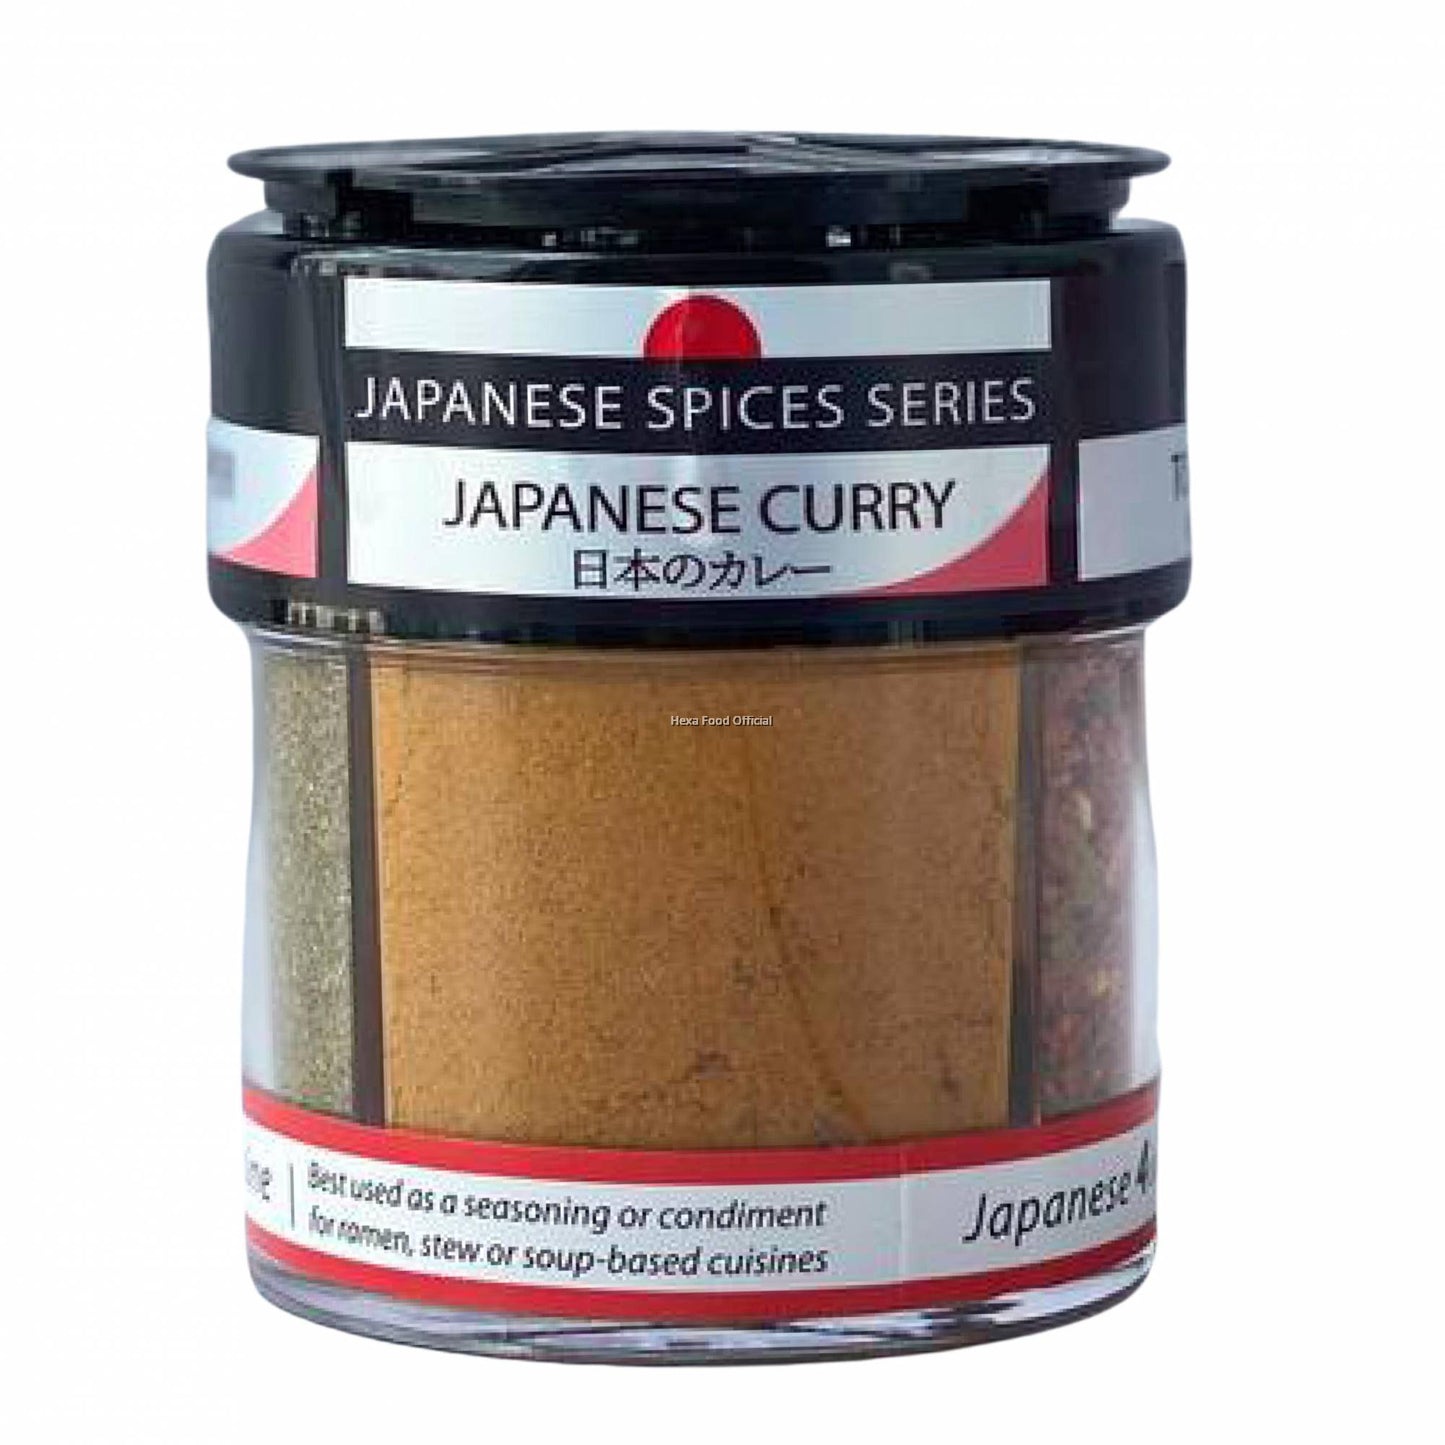 HEXA HALAL JAPANESE 4 IN 1 SPICES SERIES